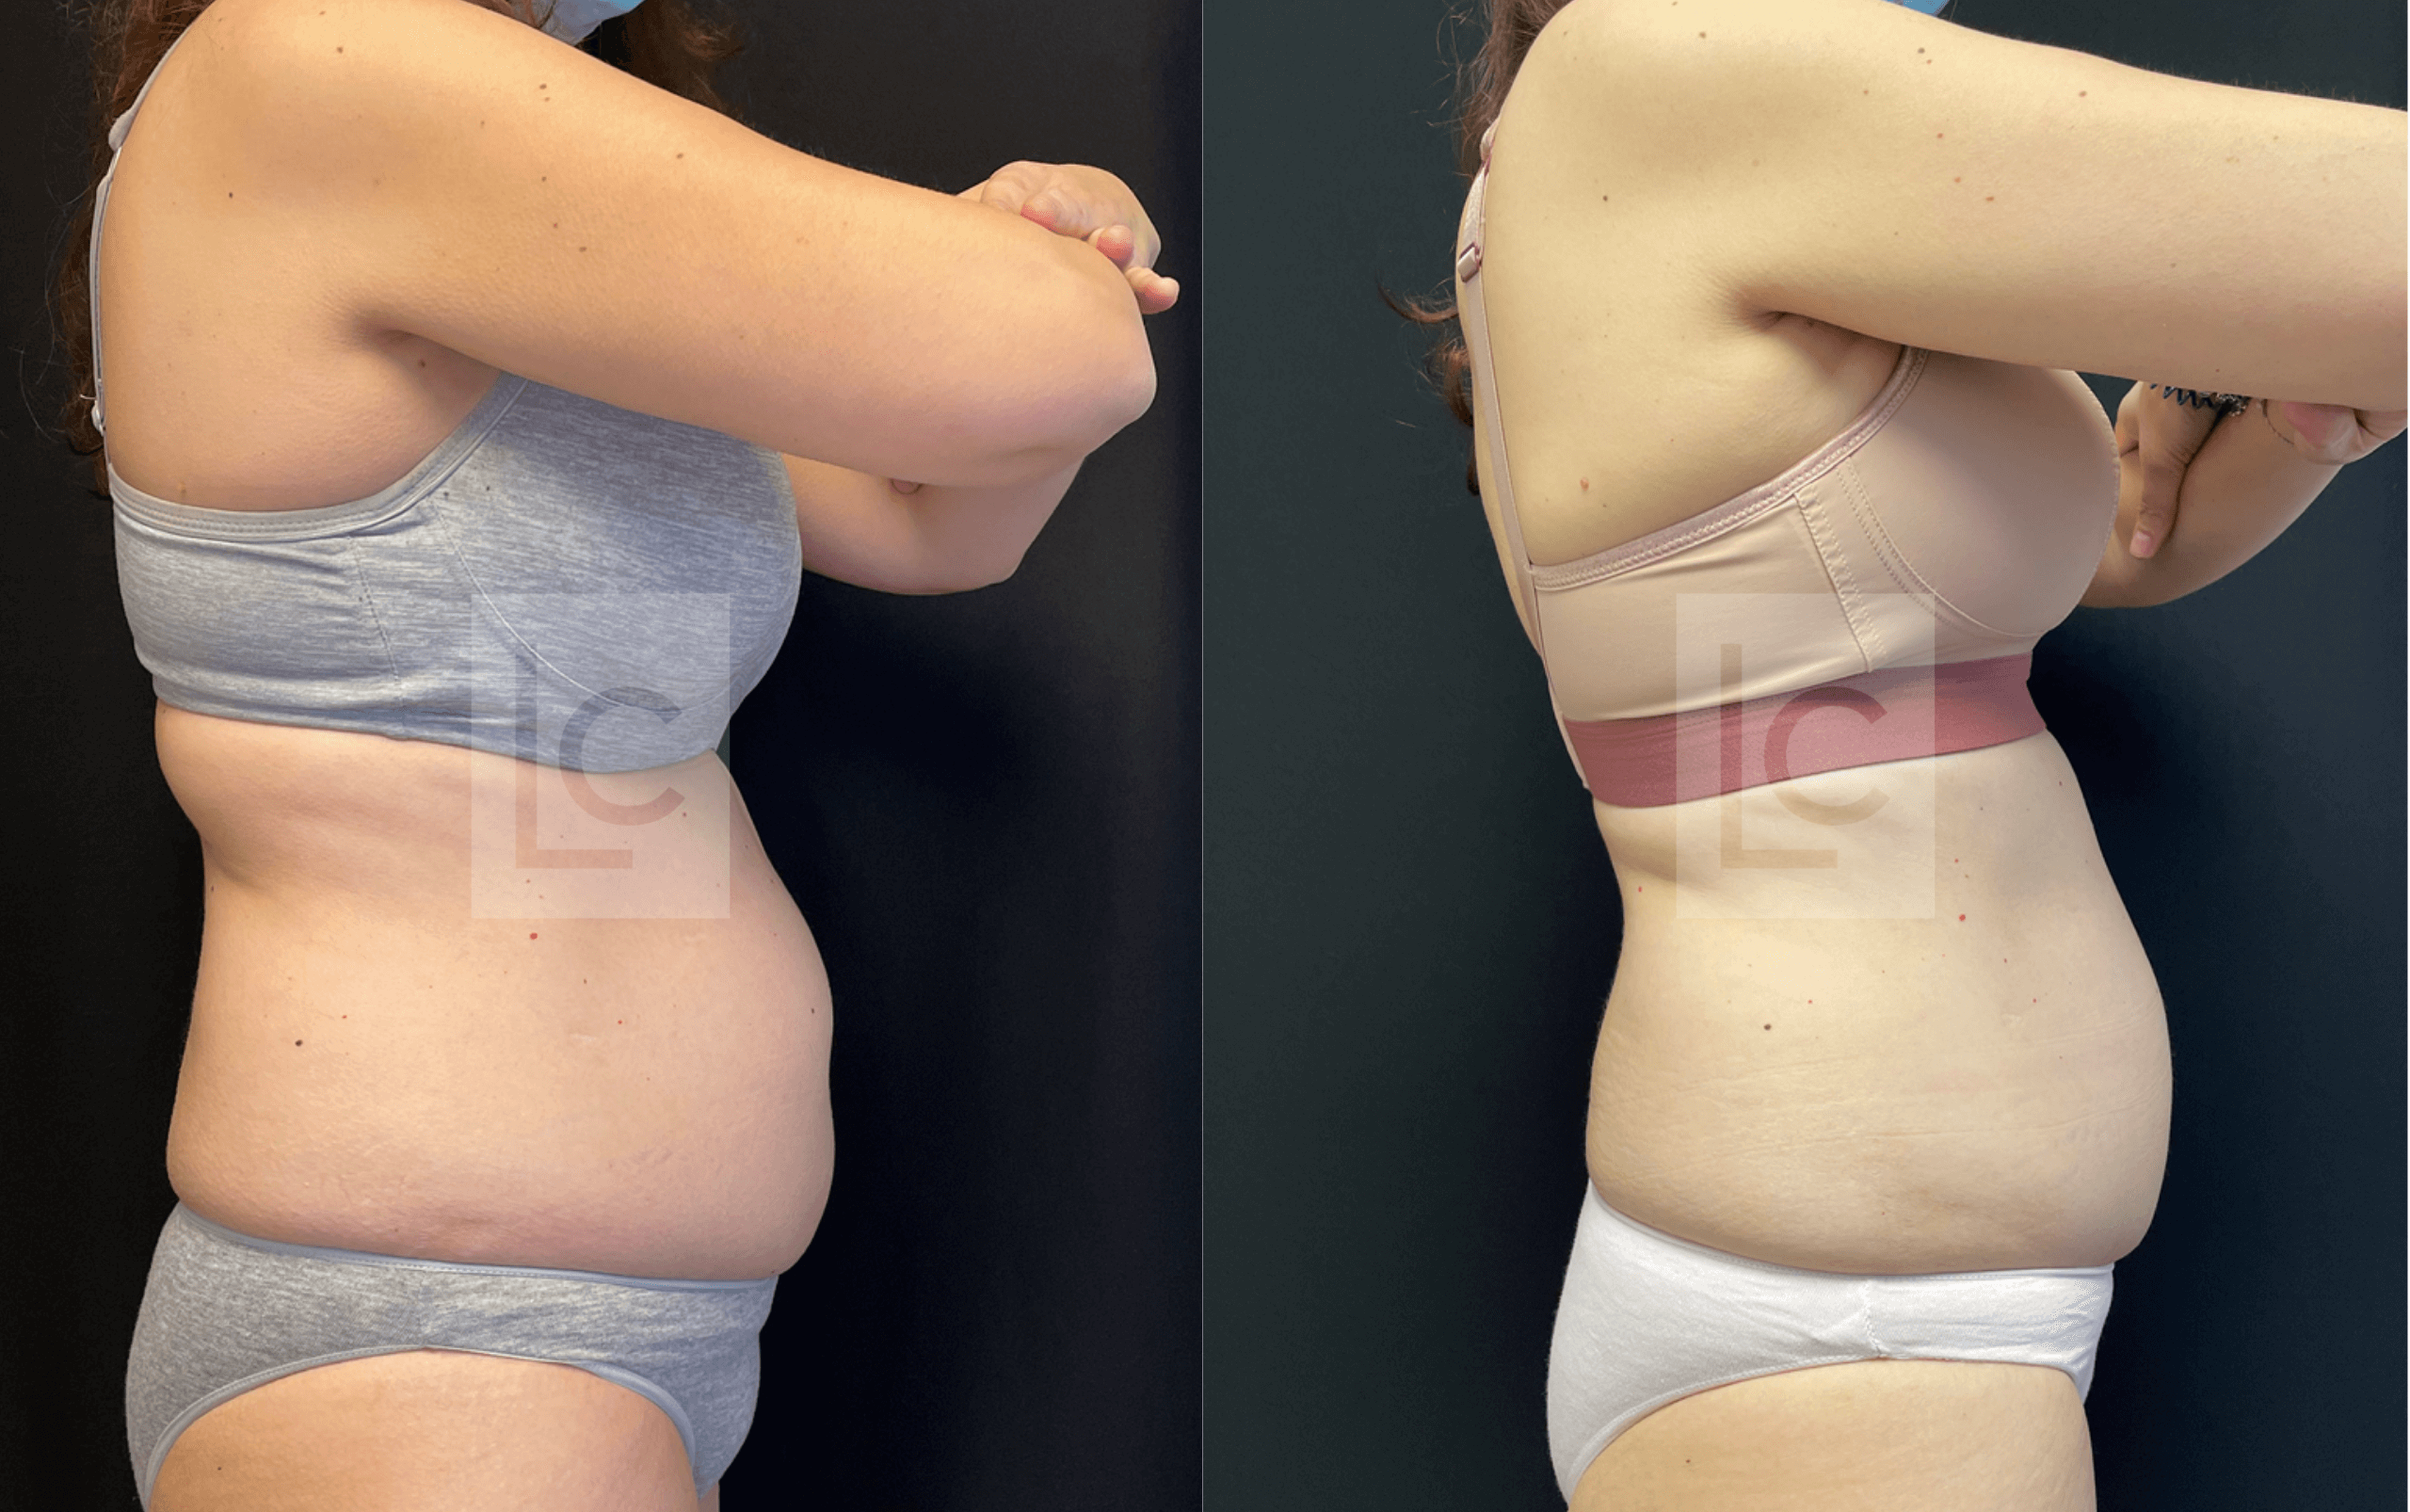 40 year old Female Abdomen Coolsculpting Cryolipolysis Results